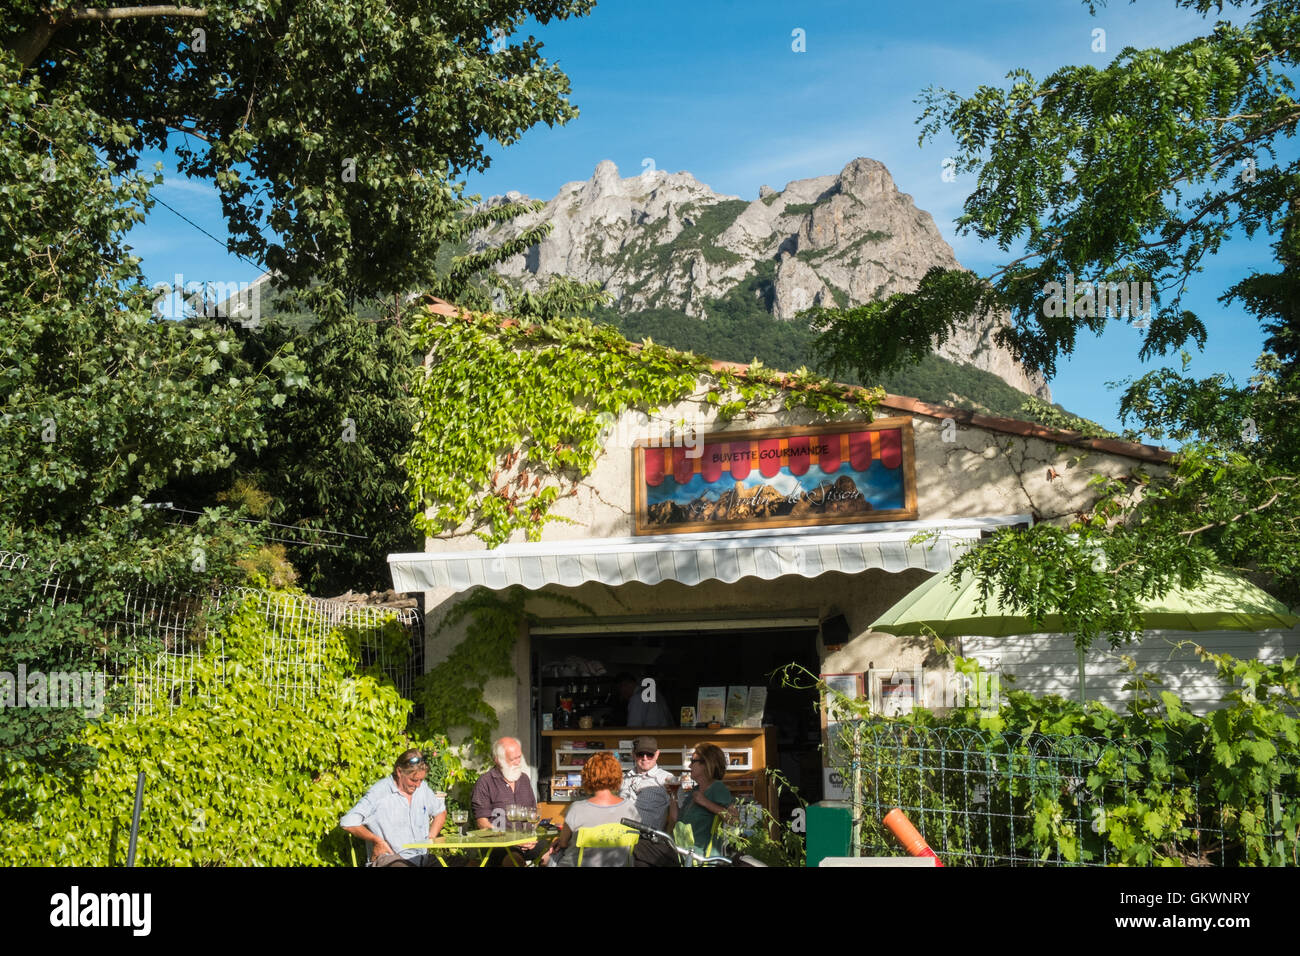 Bugarach Mountain in background,backdrop and guests sitting at small cafe in Bugarach,Aude Province,South of France. Stock Photo